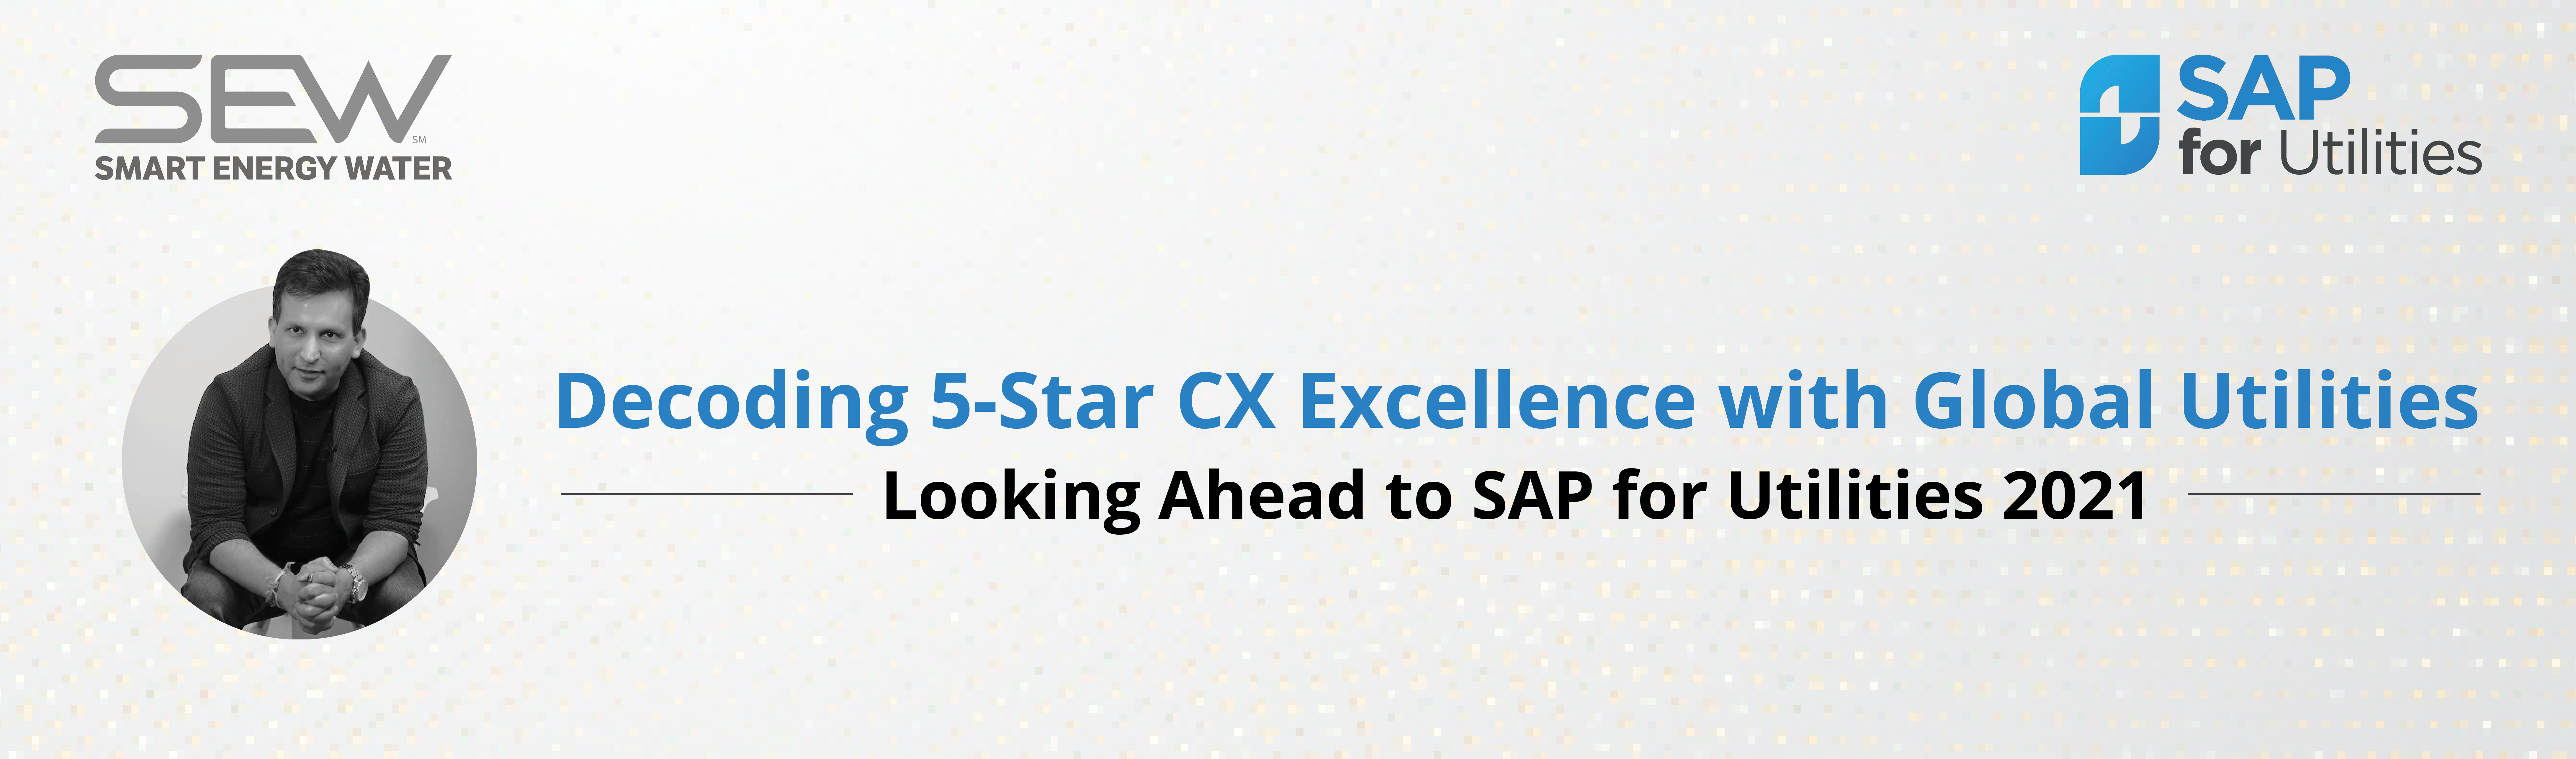 Decoding 5-Star CX Excellence with Global Utilities